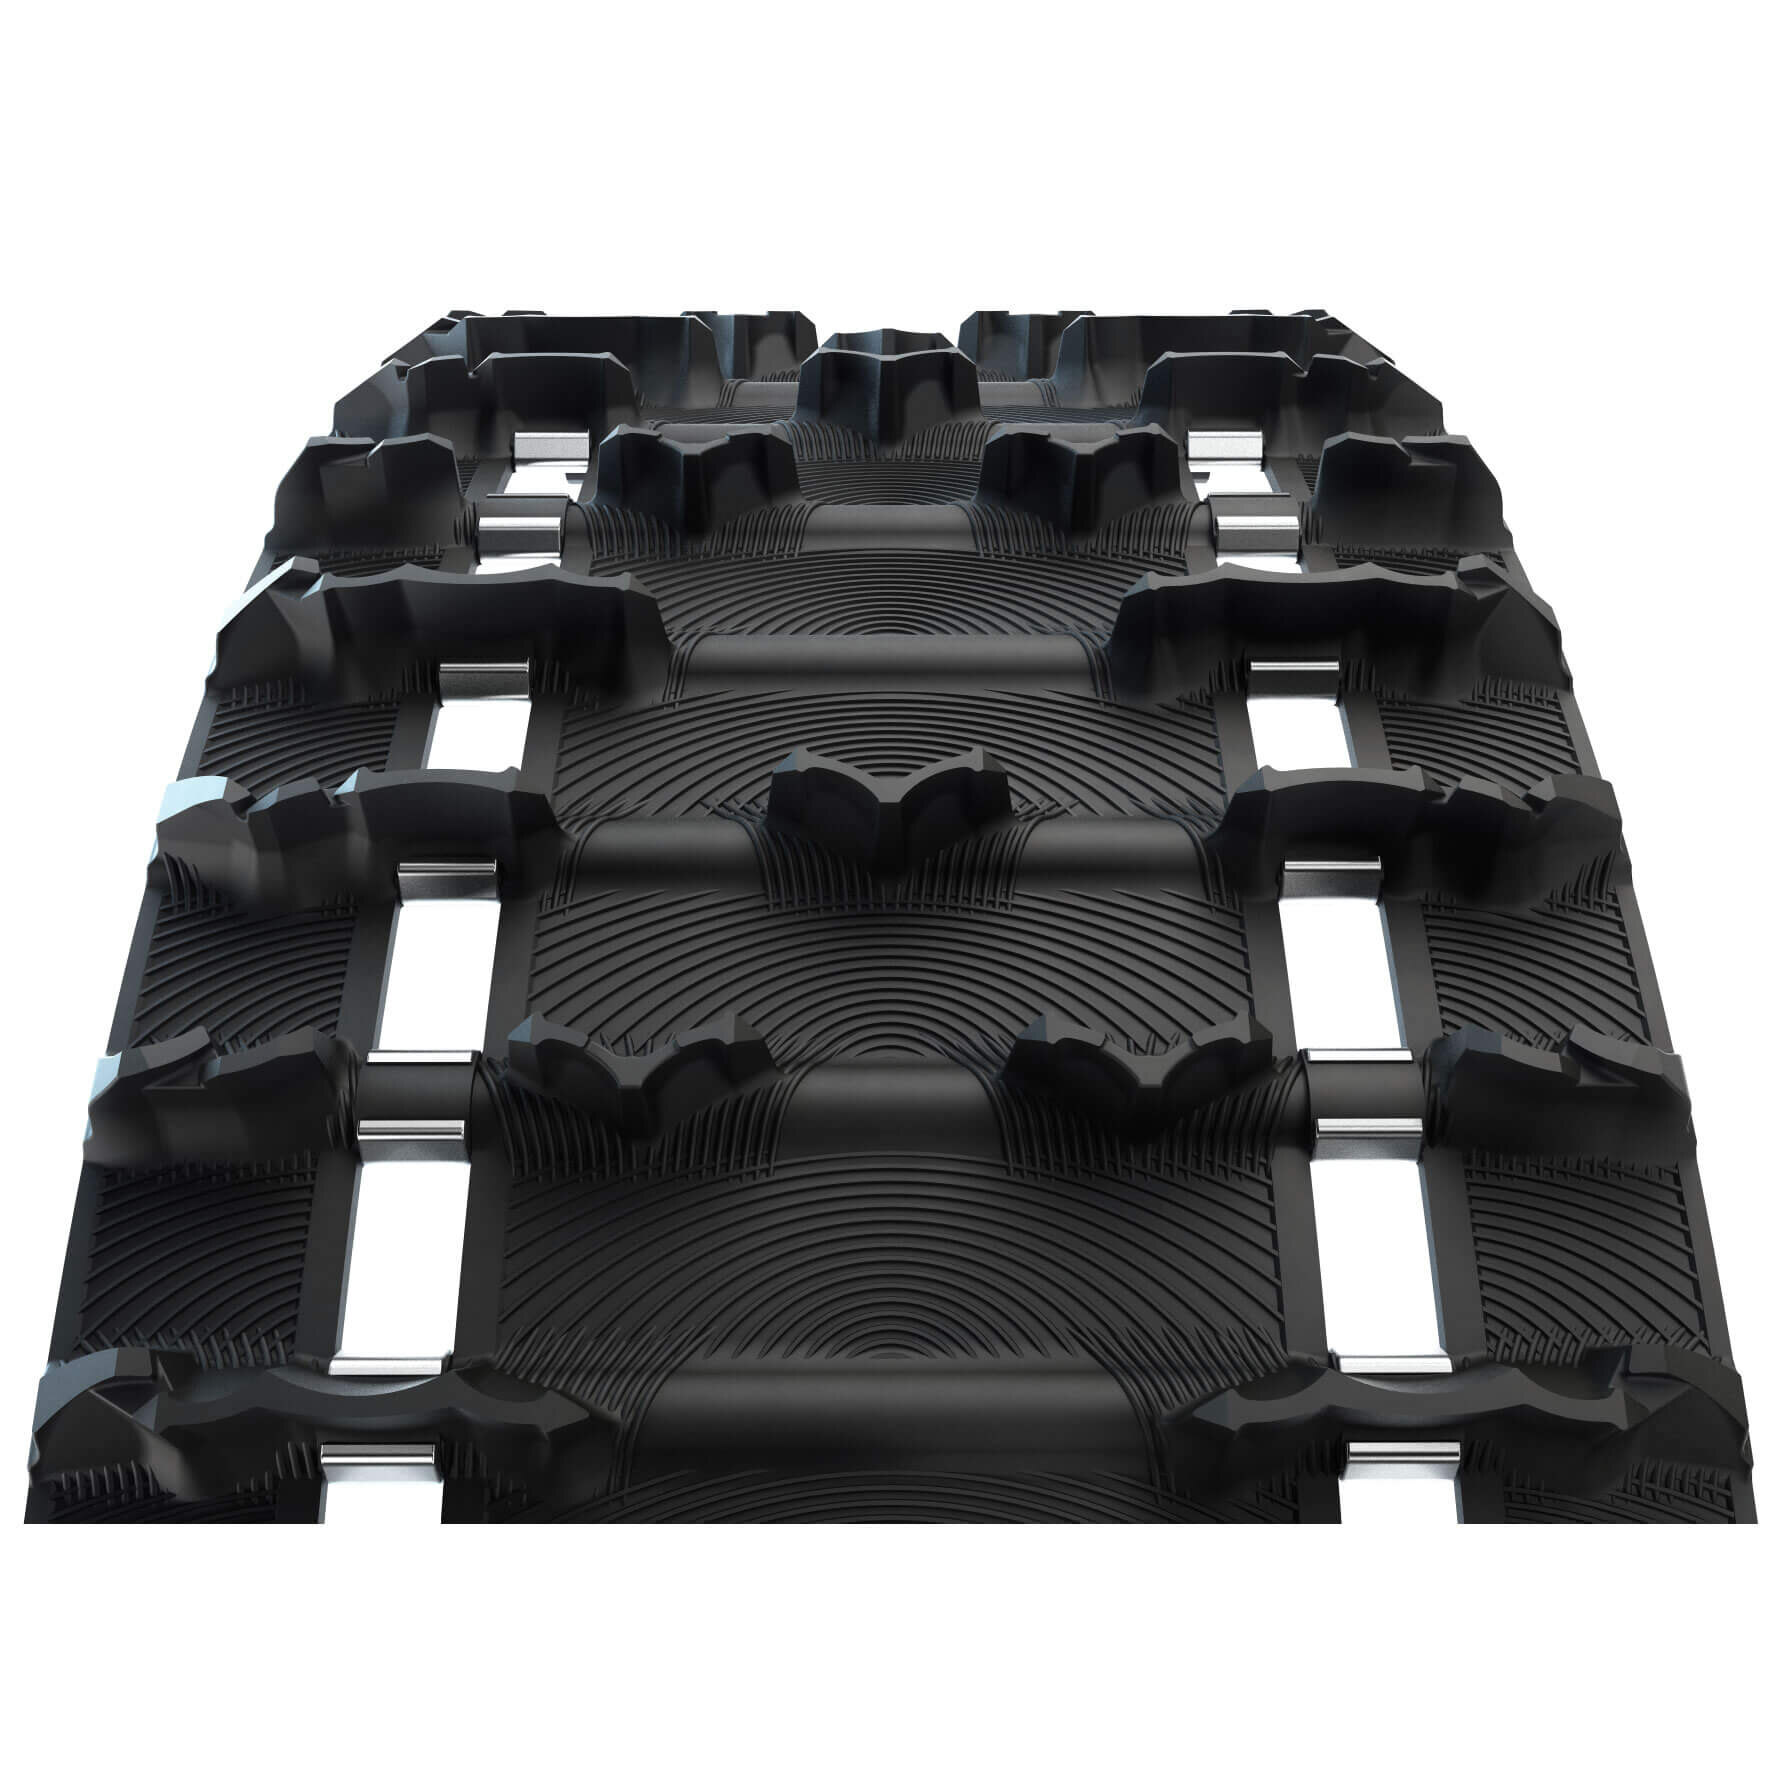 Camso® RipSaw II Track